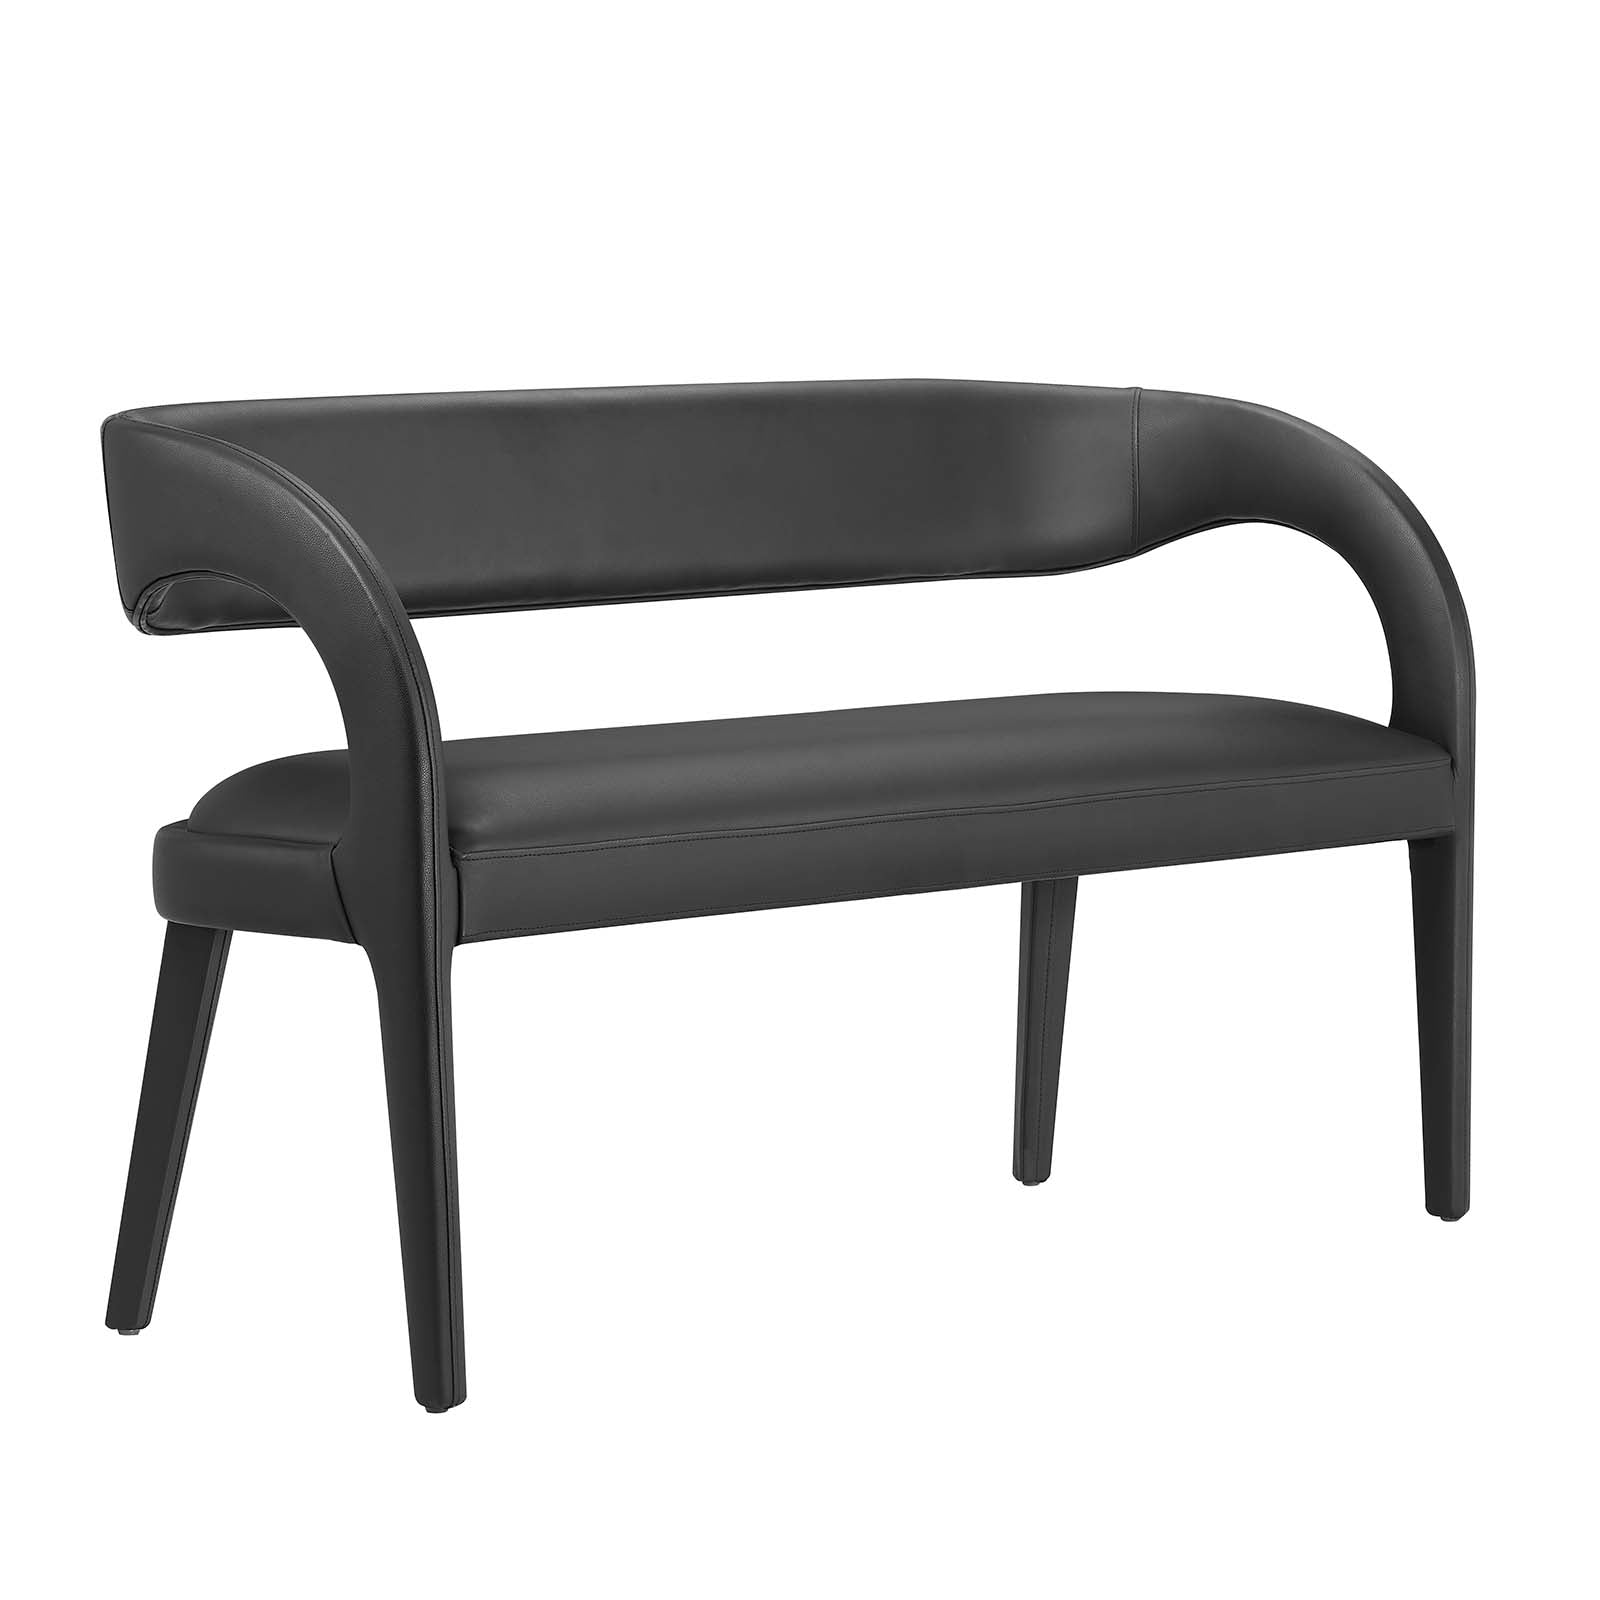 Pinnacle Vegan Leather Accent Bench